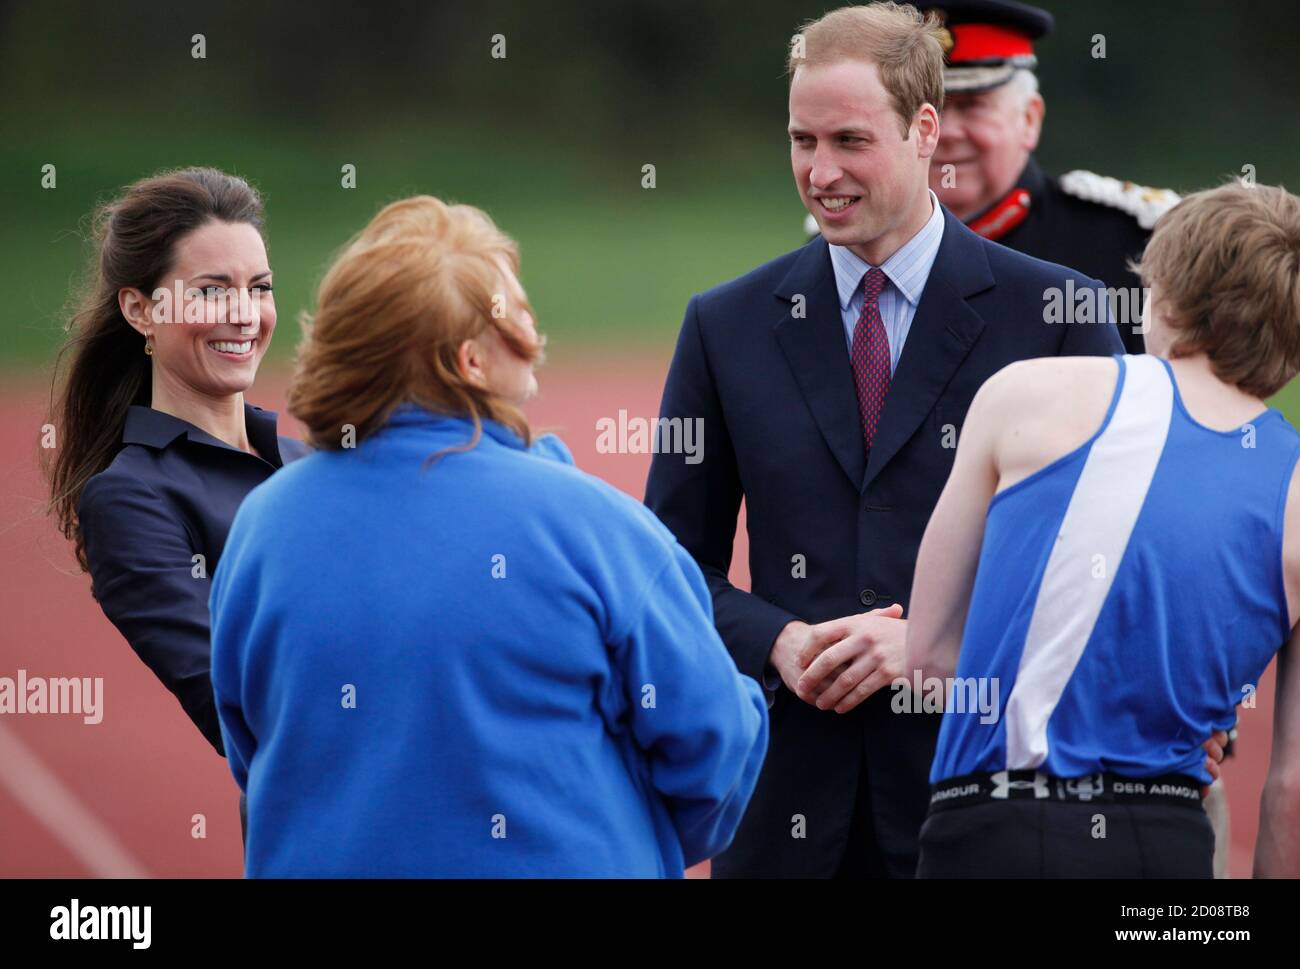 Britain's Prince William (3rd L) and his fiancee, Kate Middleton (L), talk  to young athletes and staff during their visit to Witton Country Park in  Darwen, northern England April 11, 2011. A